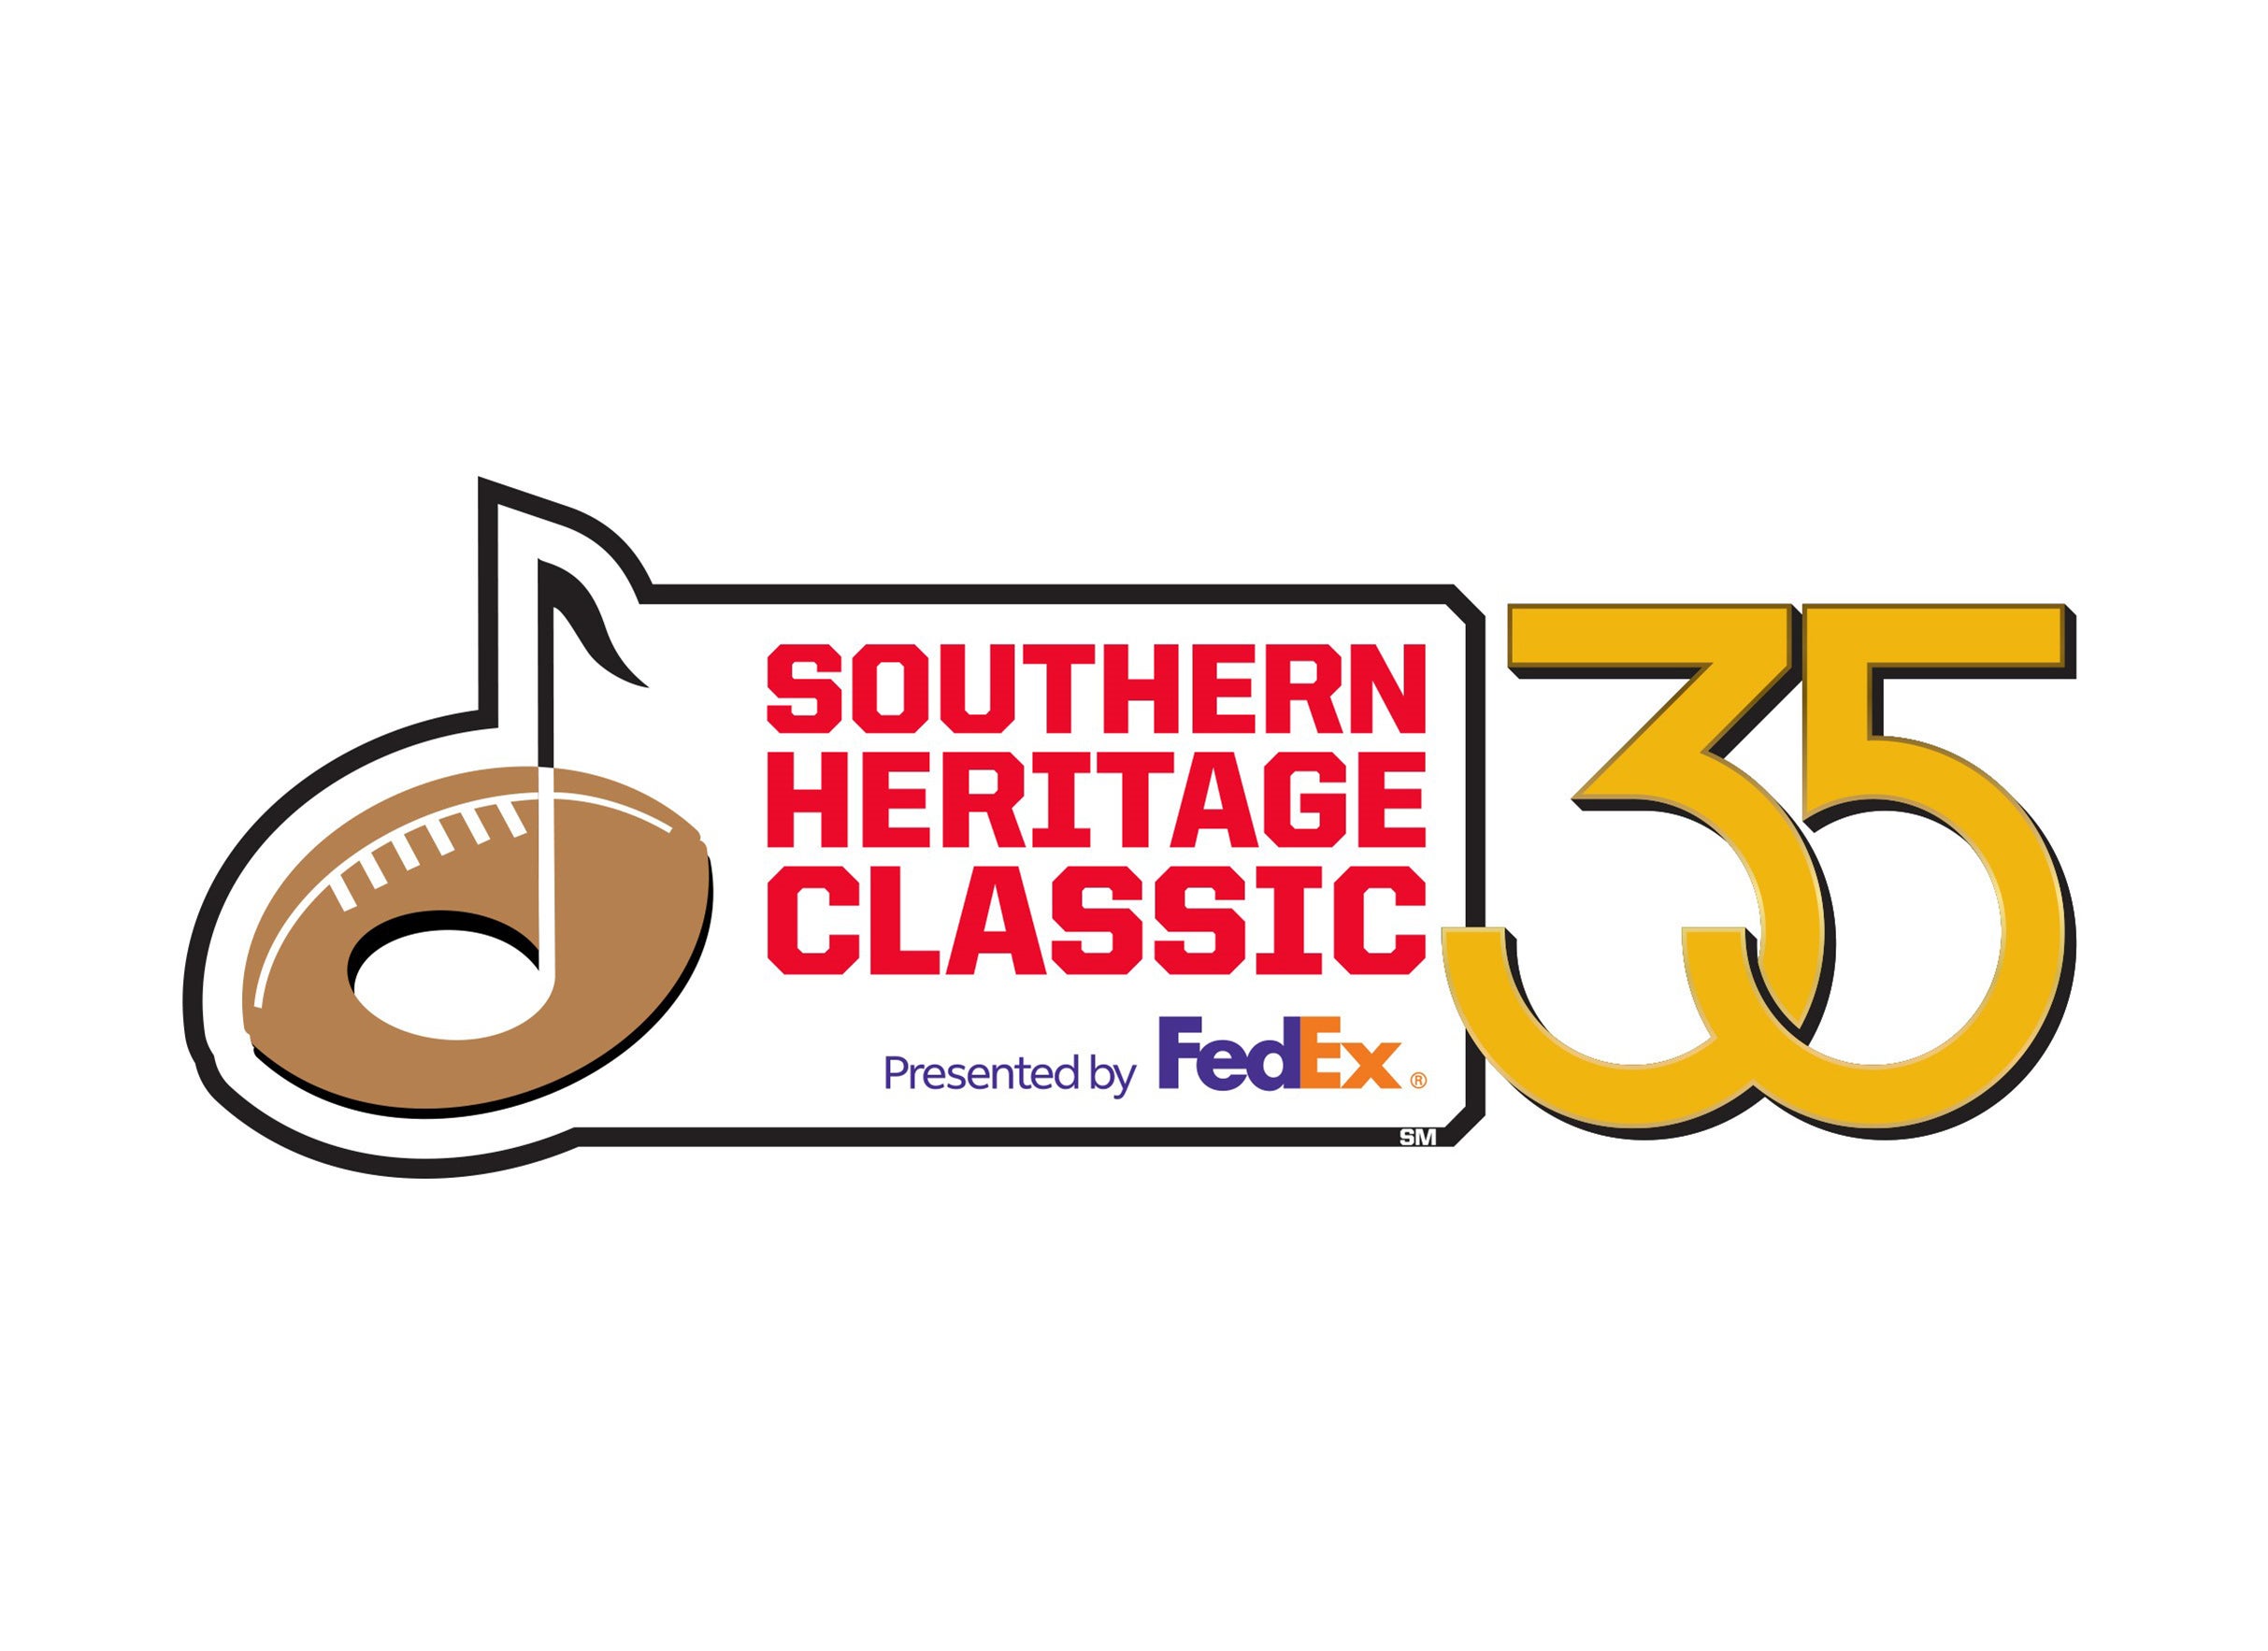 Southern Heritage Classic Arkansas-Pine Bluff  v Tennessee State hero